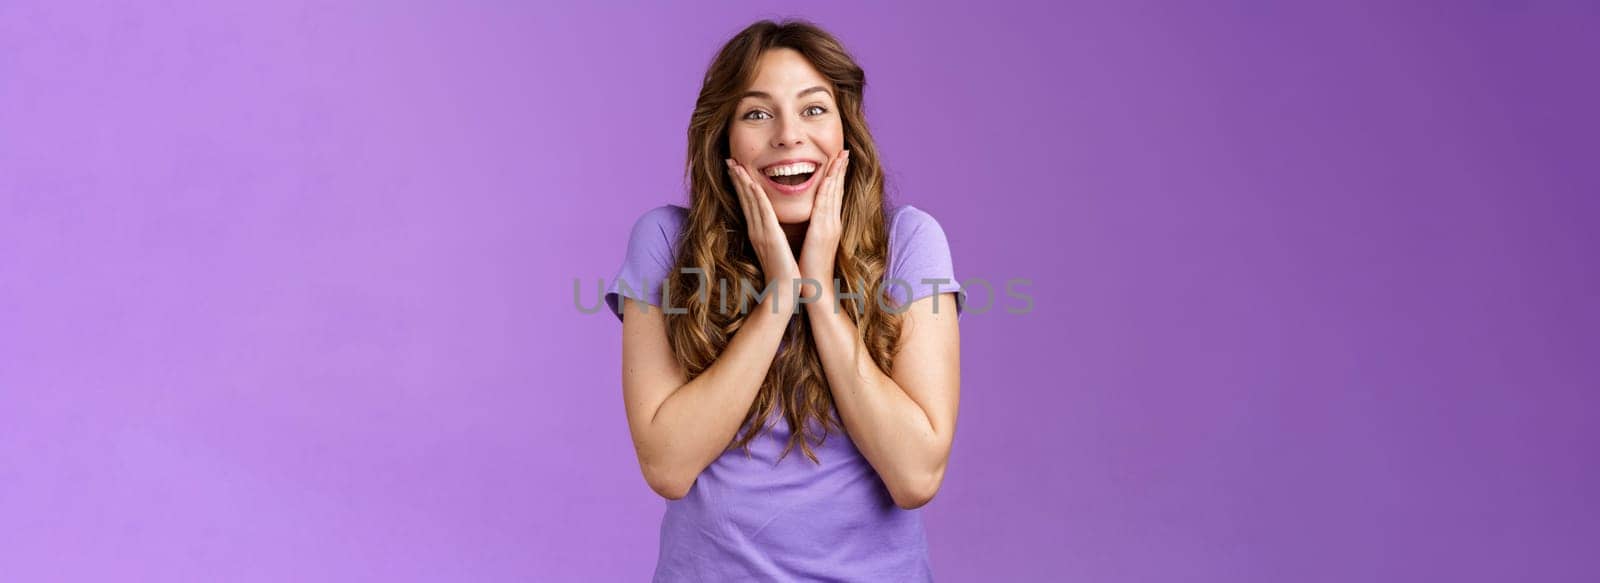 Happy lively lucky enthusiastic girl curly hairstyle open mouth admiration fascinated smiling broadly touch cheek impressed surprised awesome incredible positive news stand purple background.